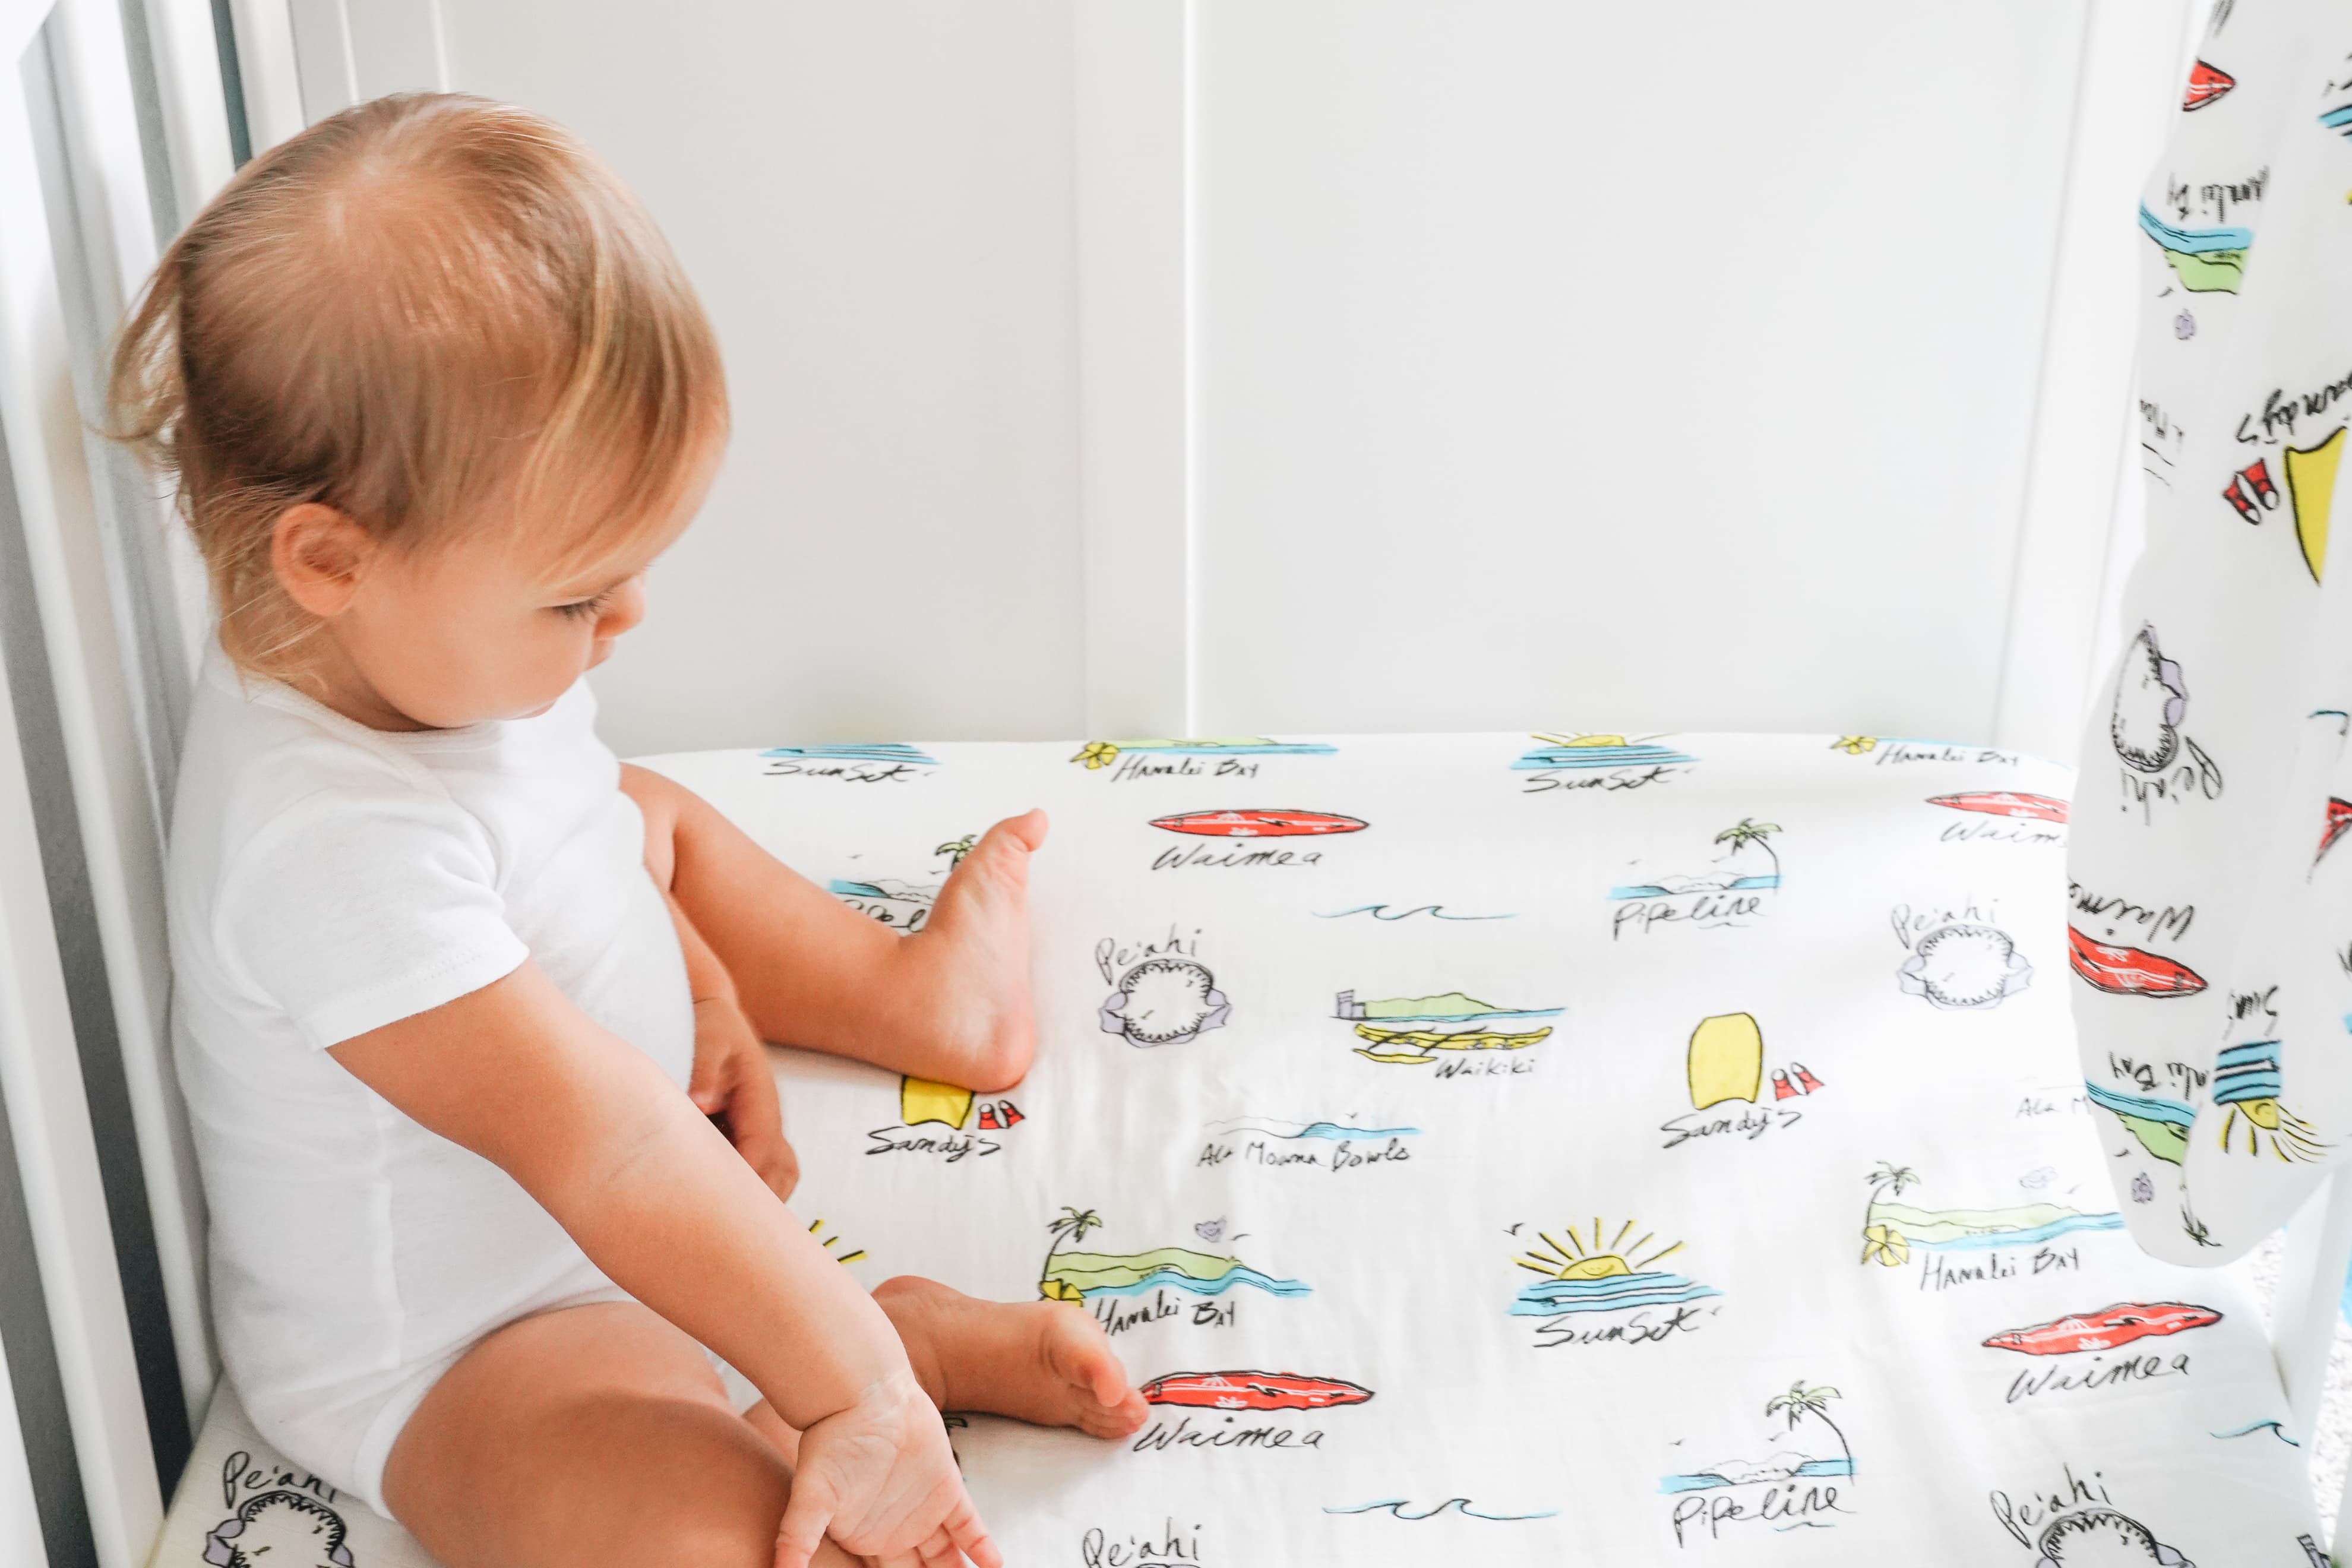 Best Fabric for Baby Blanket and Clothes